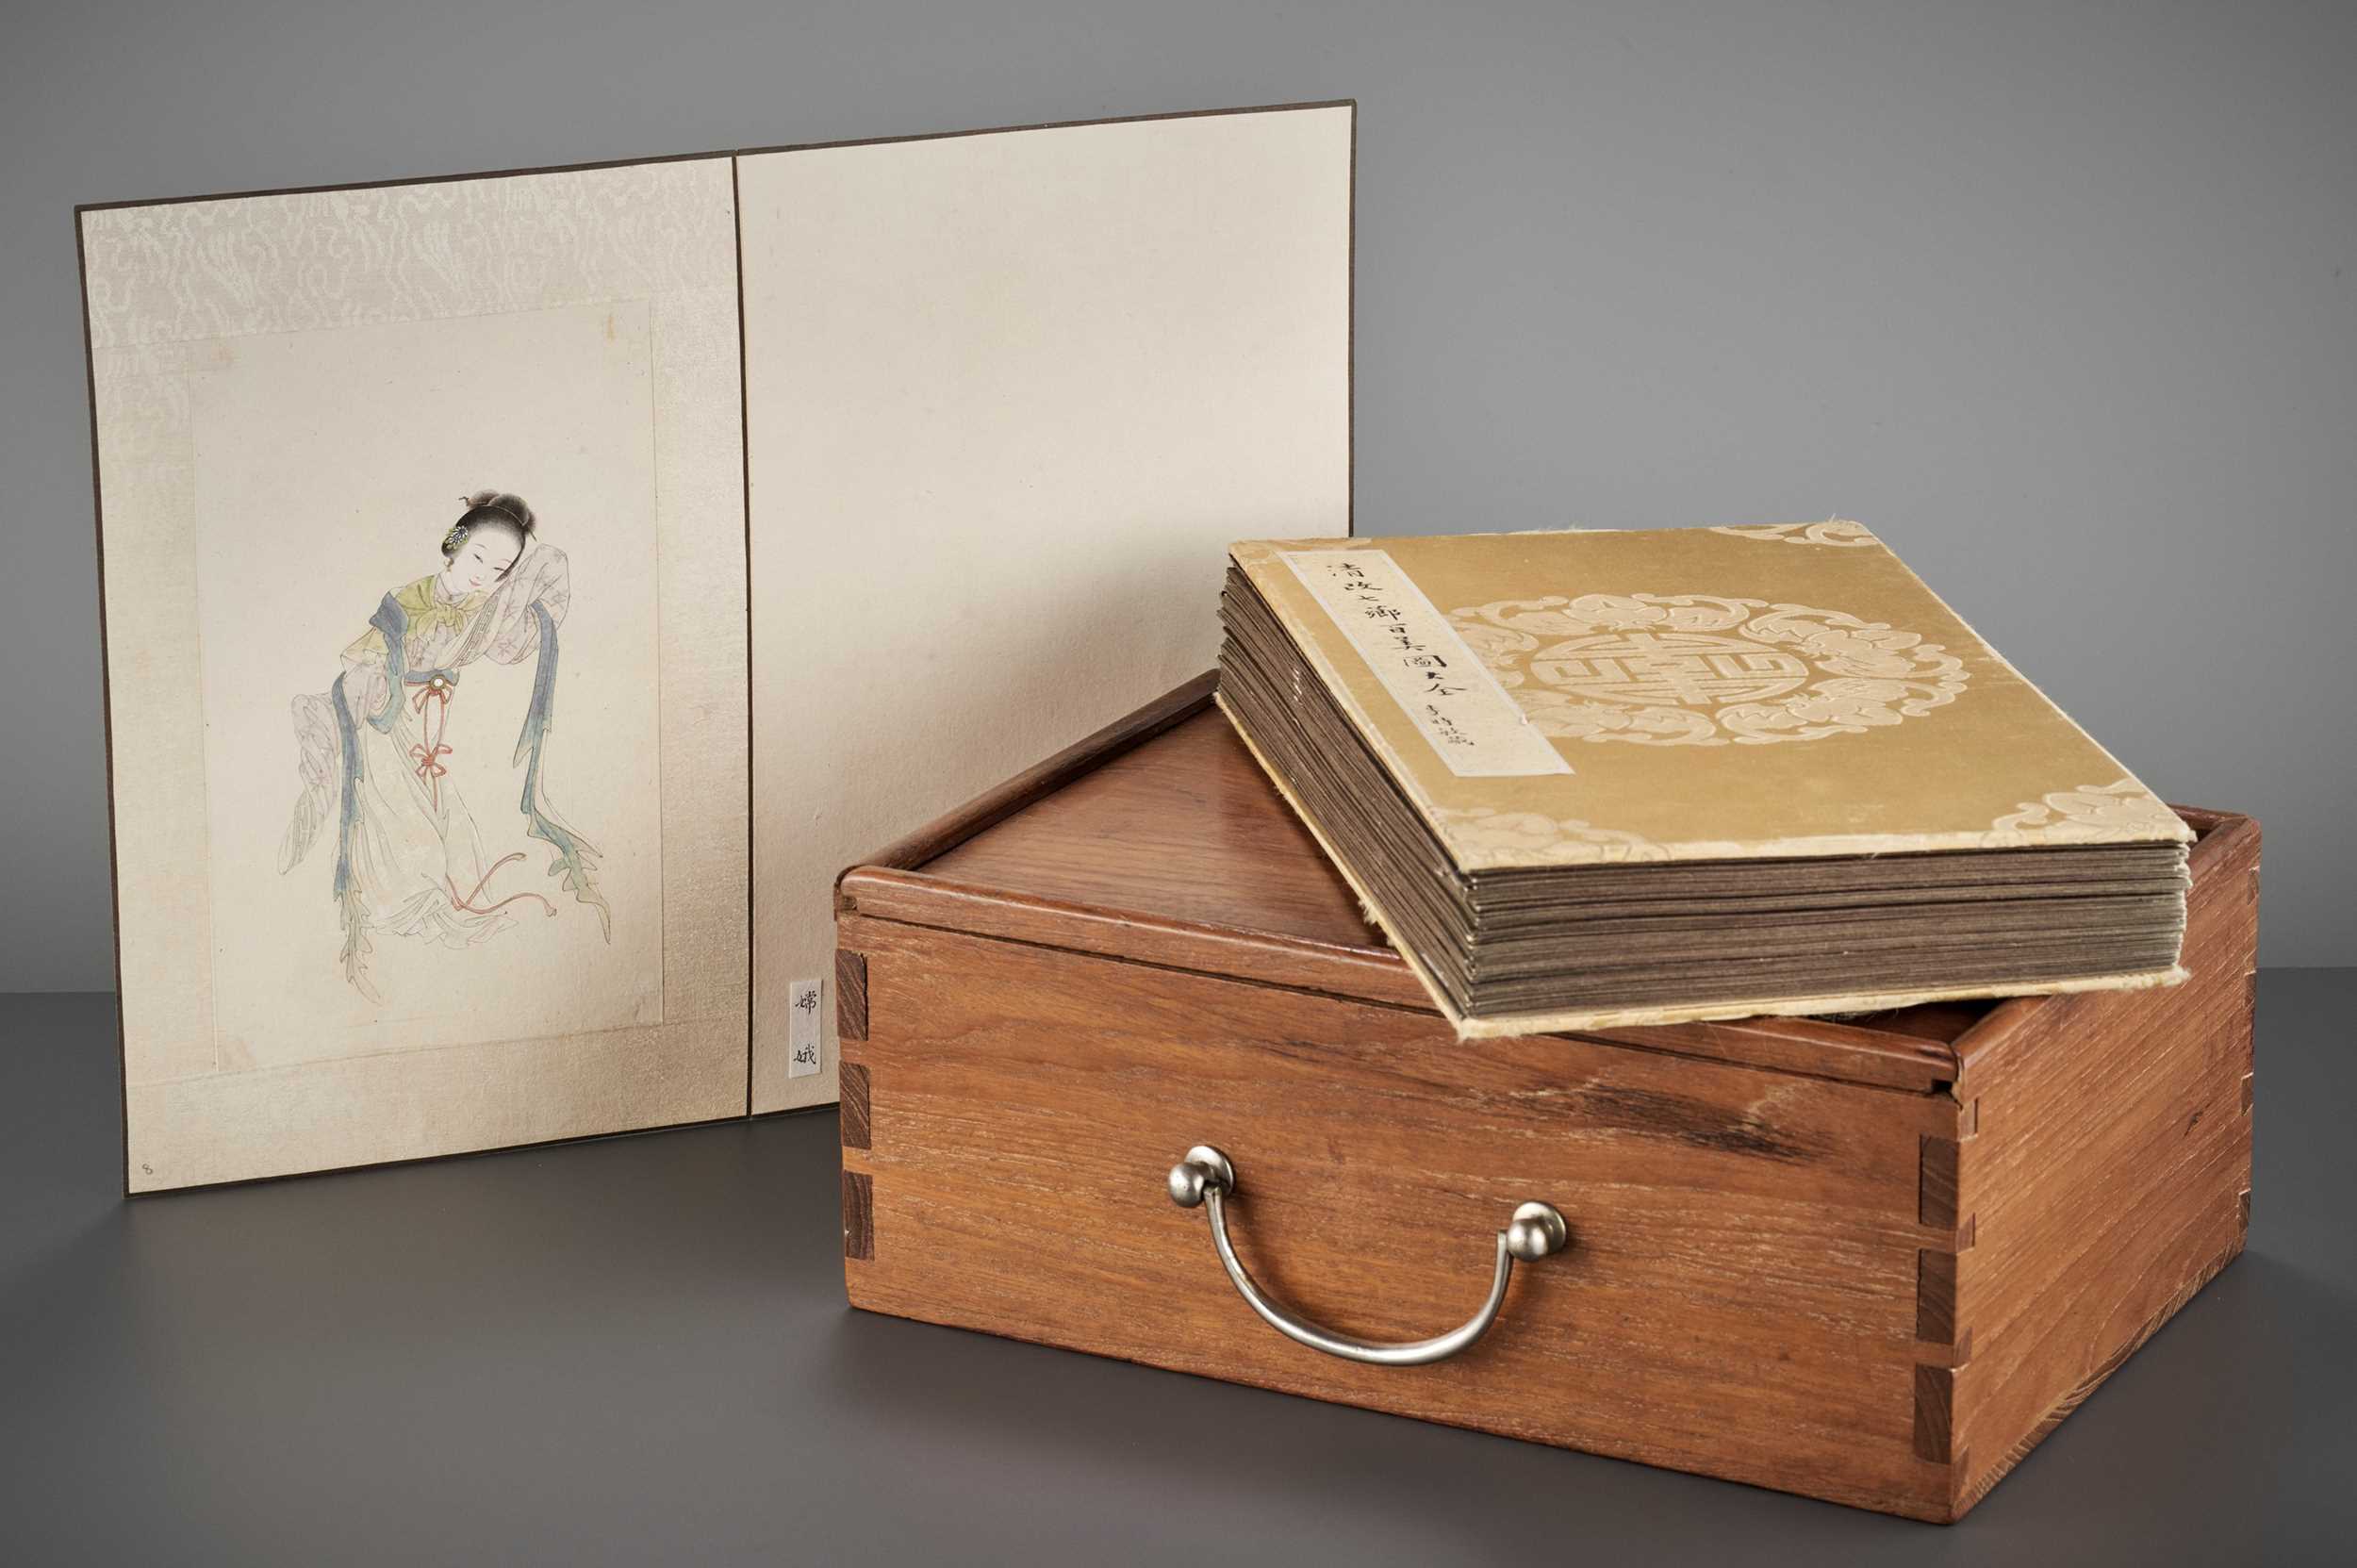 Lot 531 - ‘ONE HUNDRED BEAUTIES’ BY GAI QI (1774-1829)